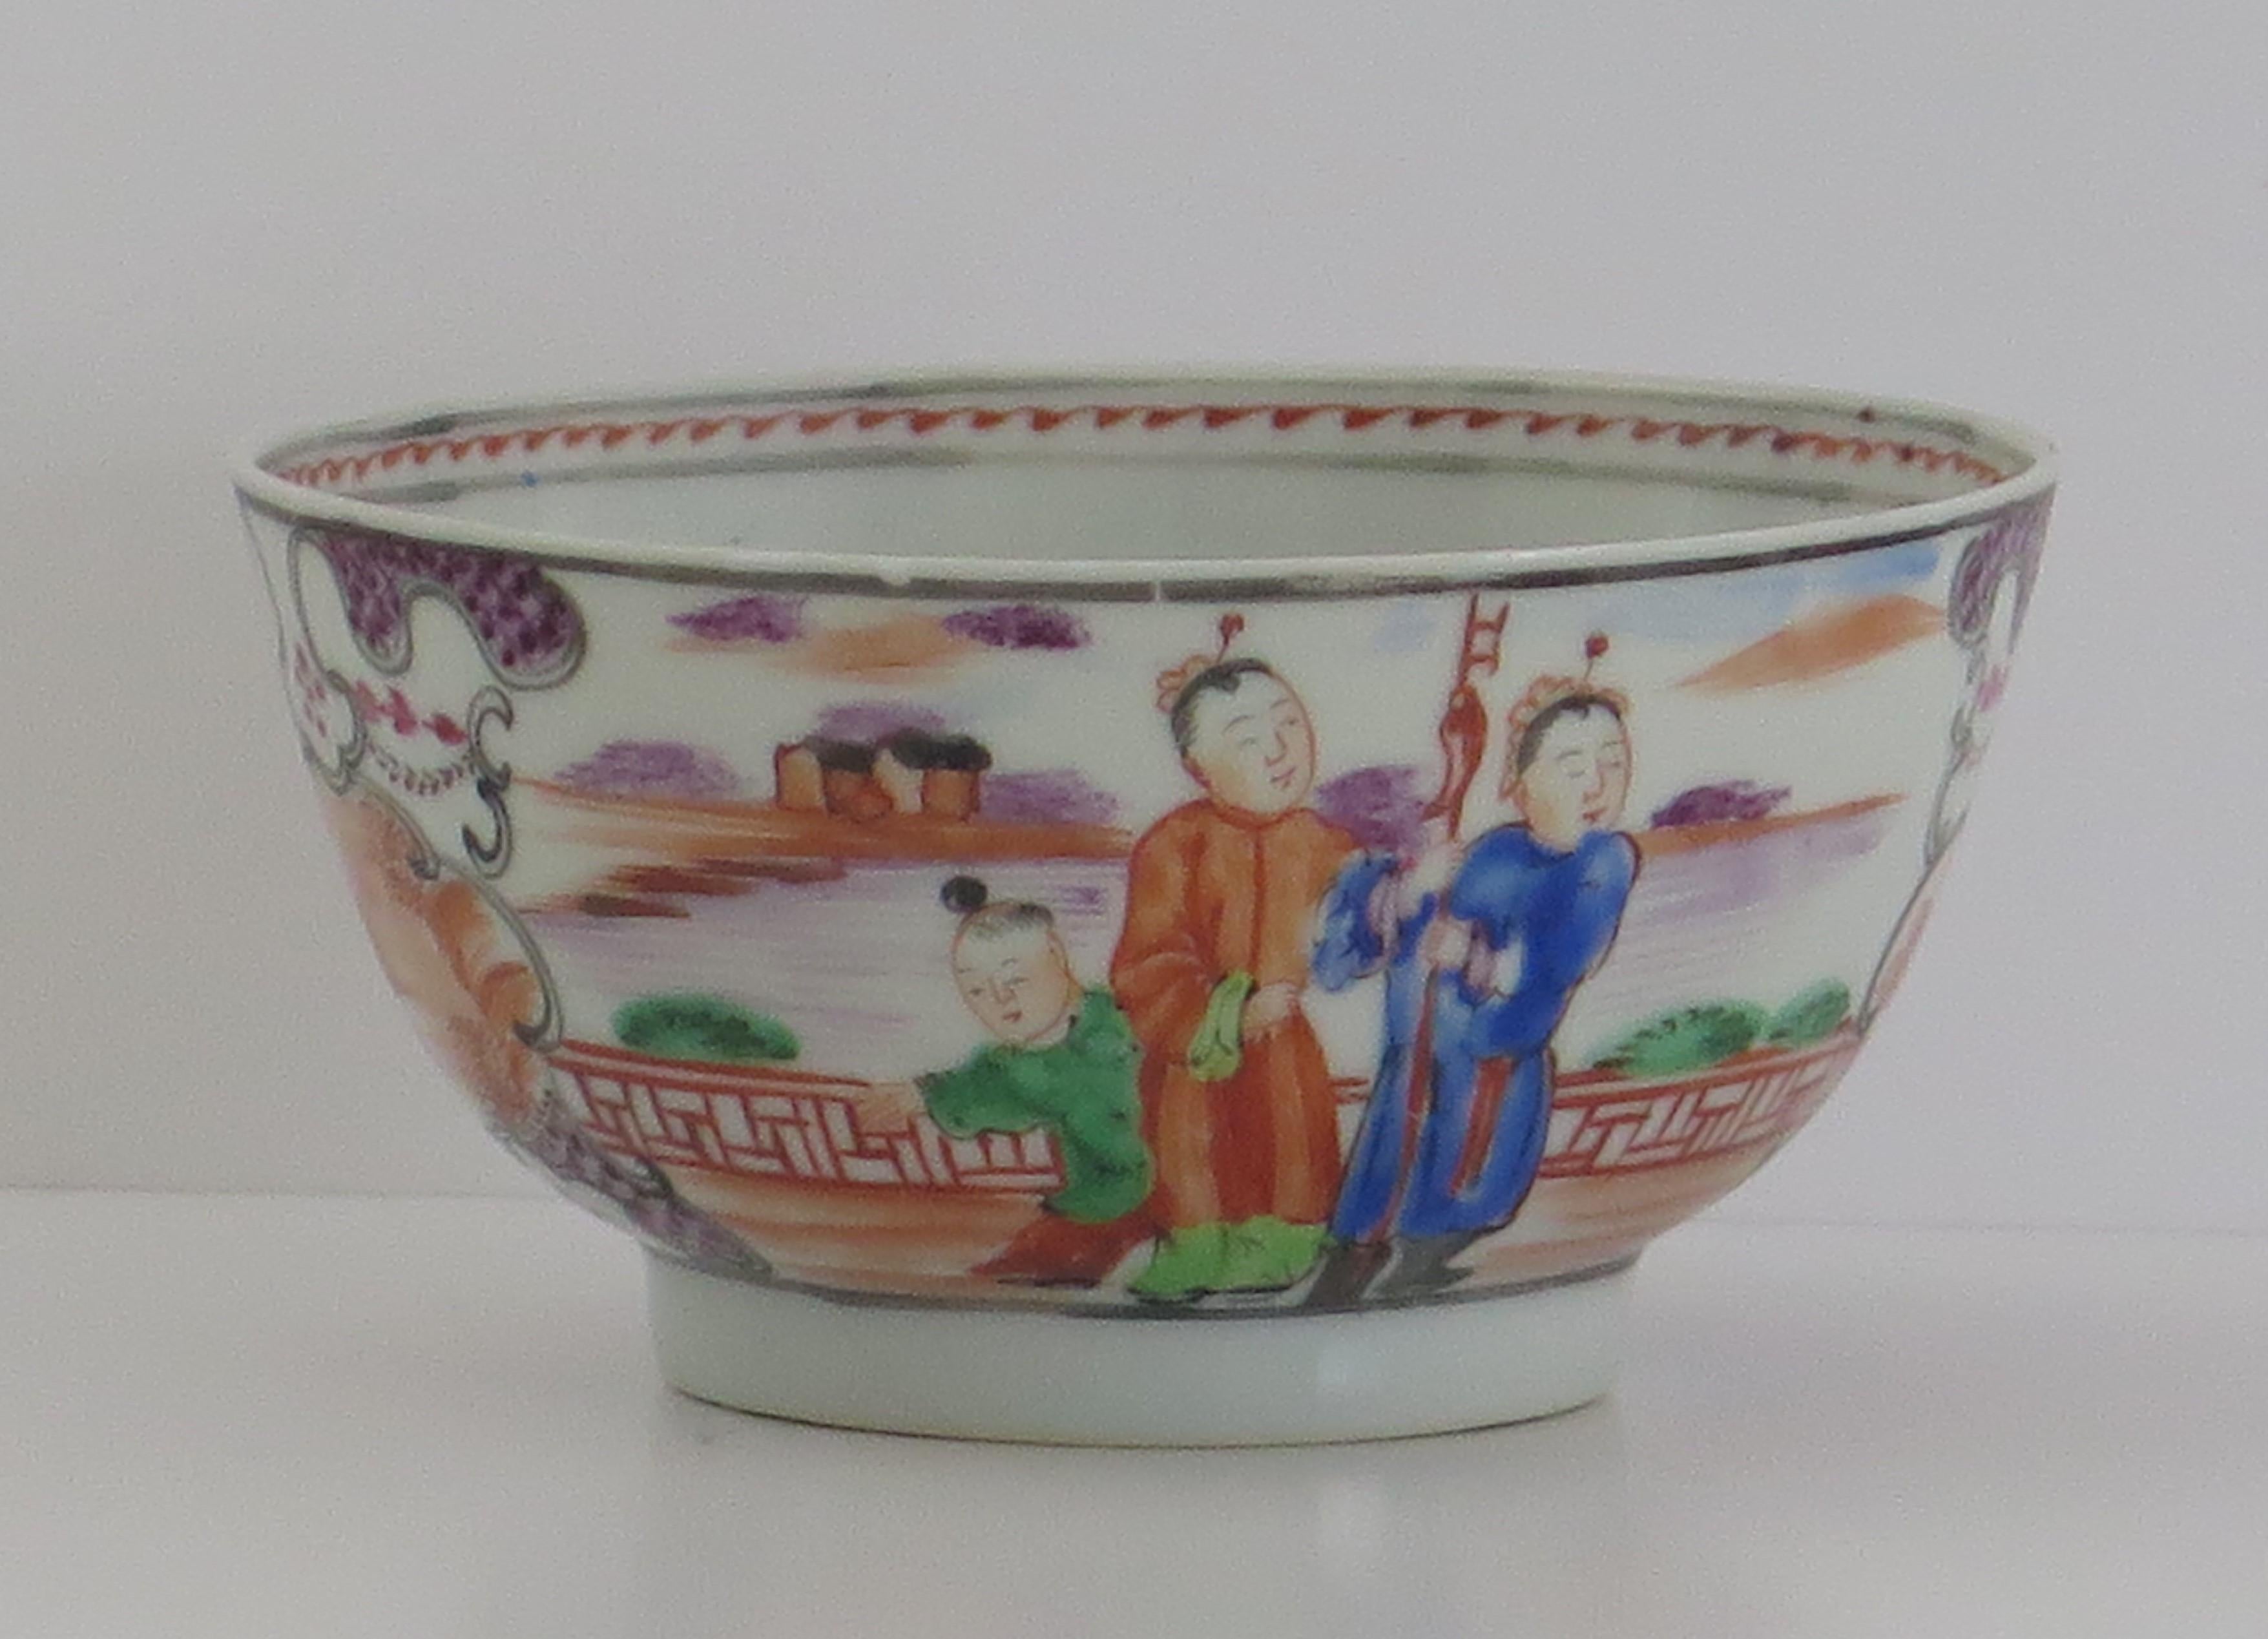 This is a finely hand painted Chinese porcelain bowl from the 18th century, Qing dynasty, Qianlong period, 1736-1795.

The bowl is beautifully decorated with two panels of figure scenes alternating with two magenta border panels. The figural